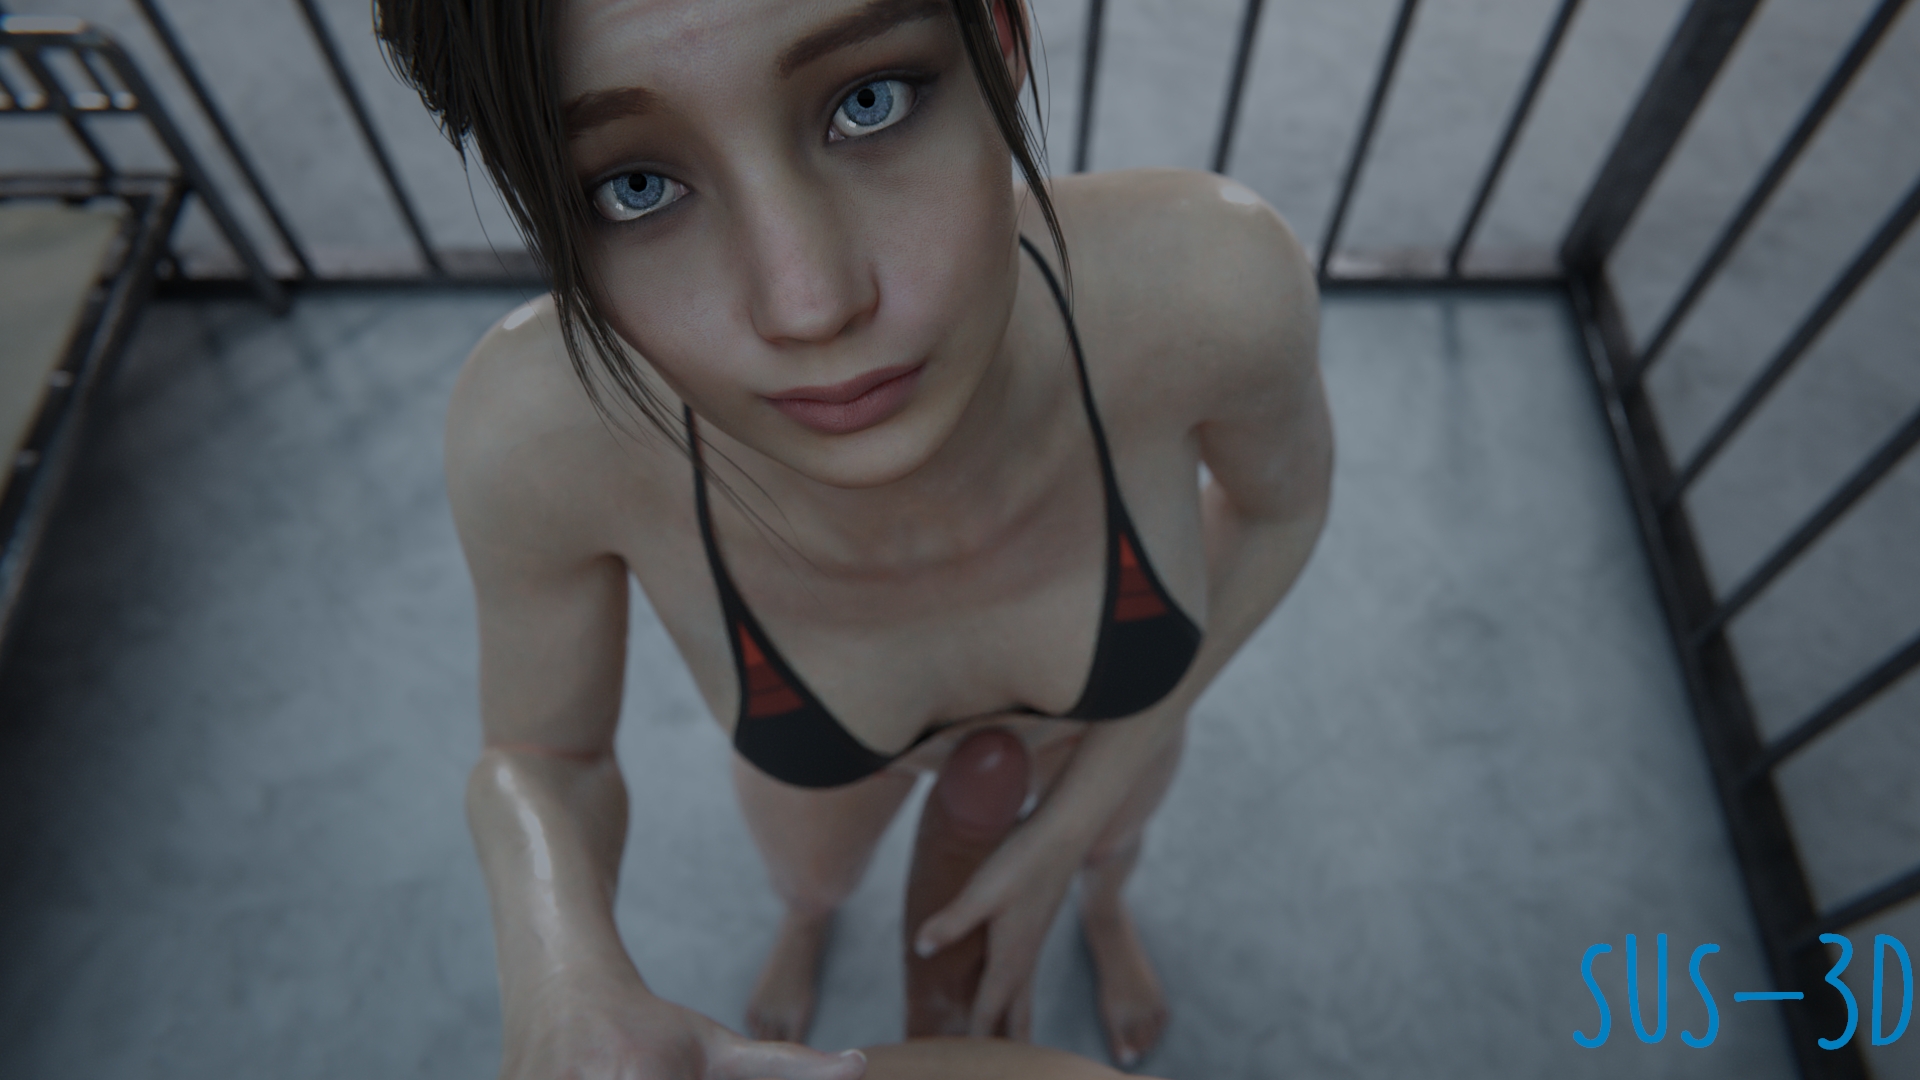 Claire Redfield going to play with a big cock Resident Evil Claire Redfield Resident Evil Tease Hot Small Tits Big Cock Teen Naked 3d Porn Girl Pov Pov Close Up 2